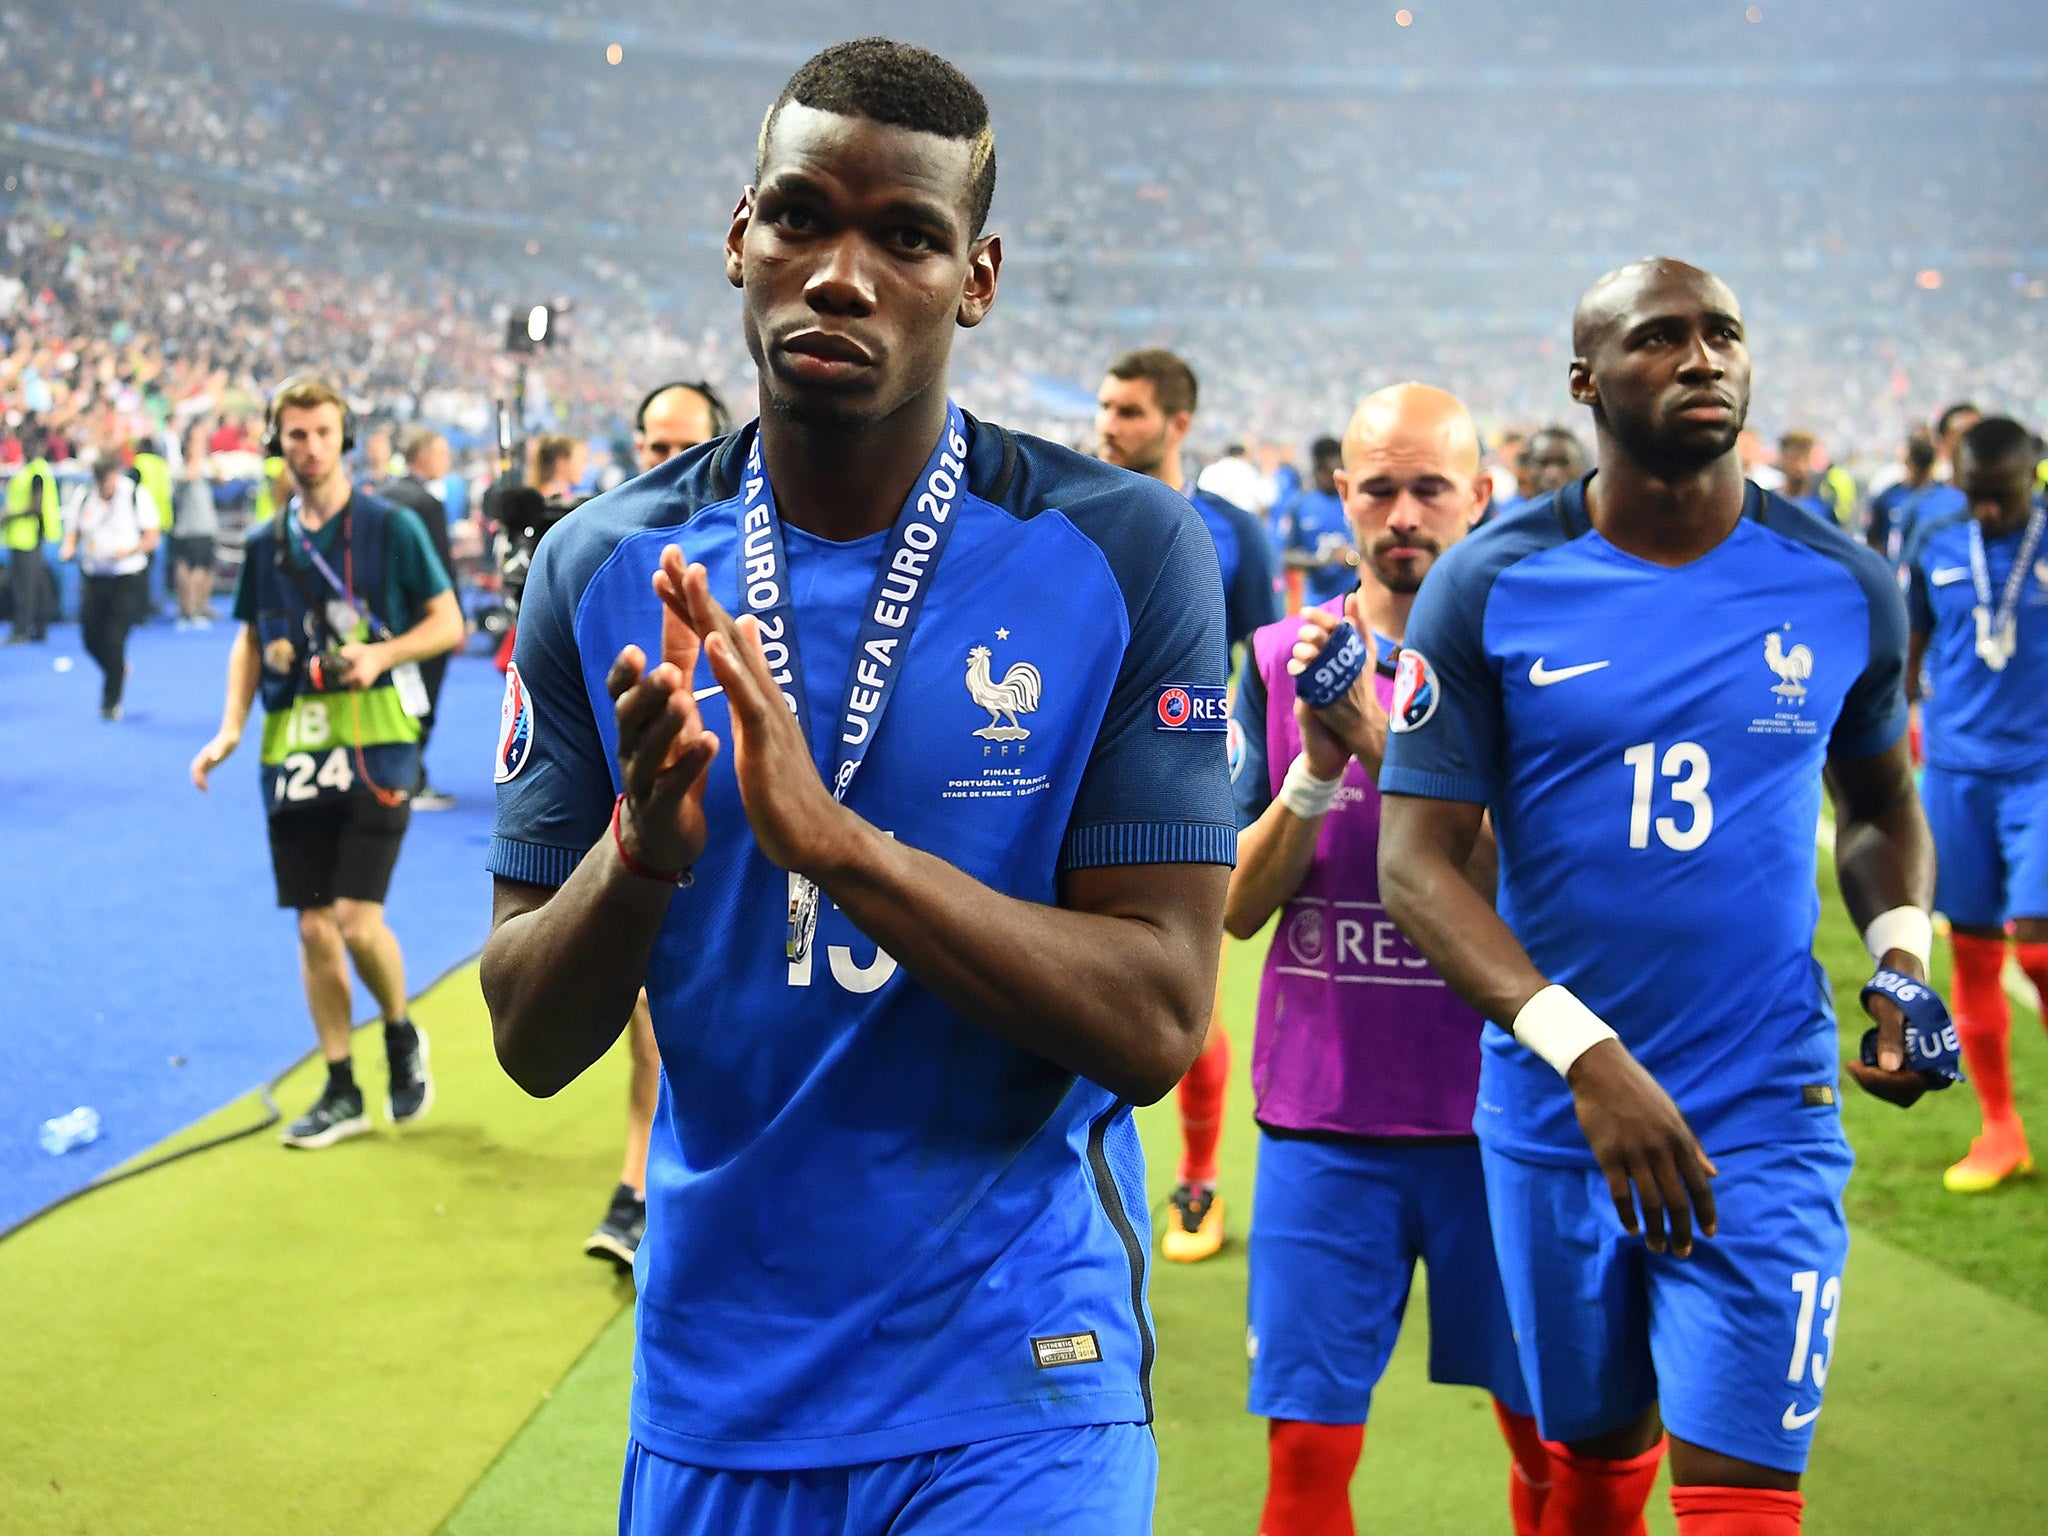 Paul Pogba is expected to join Manchester United this week